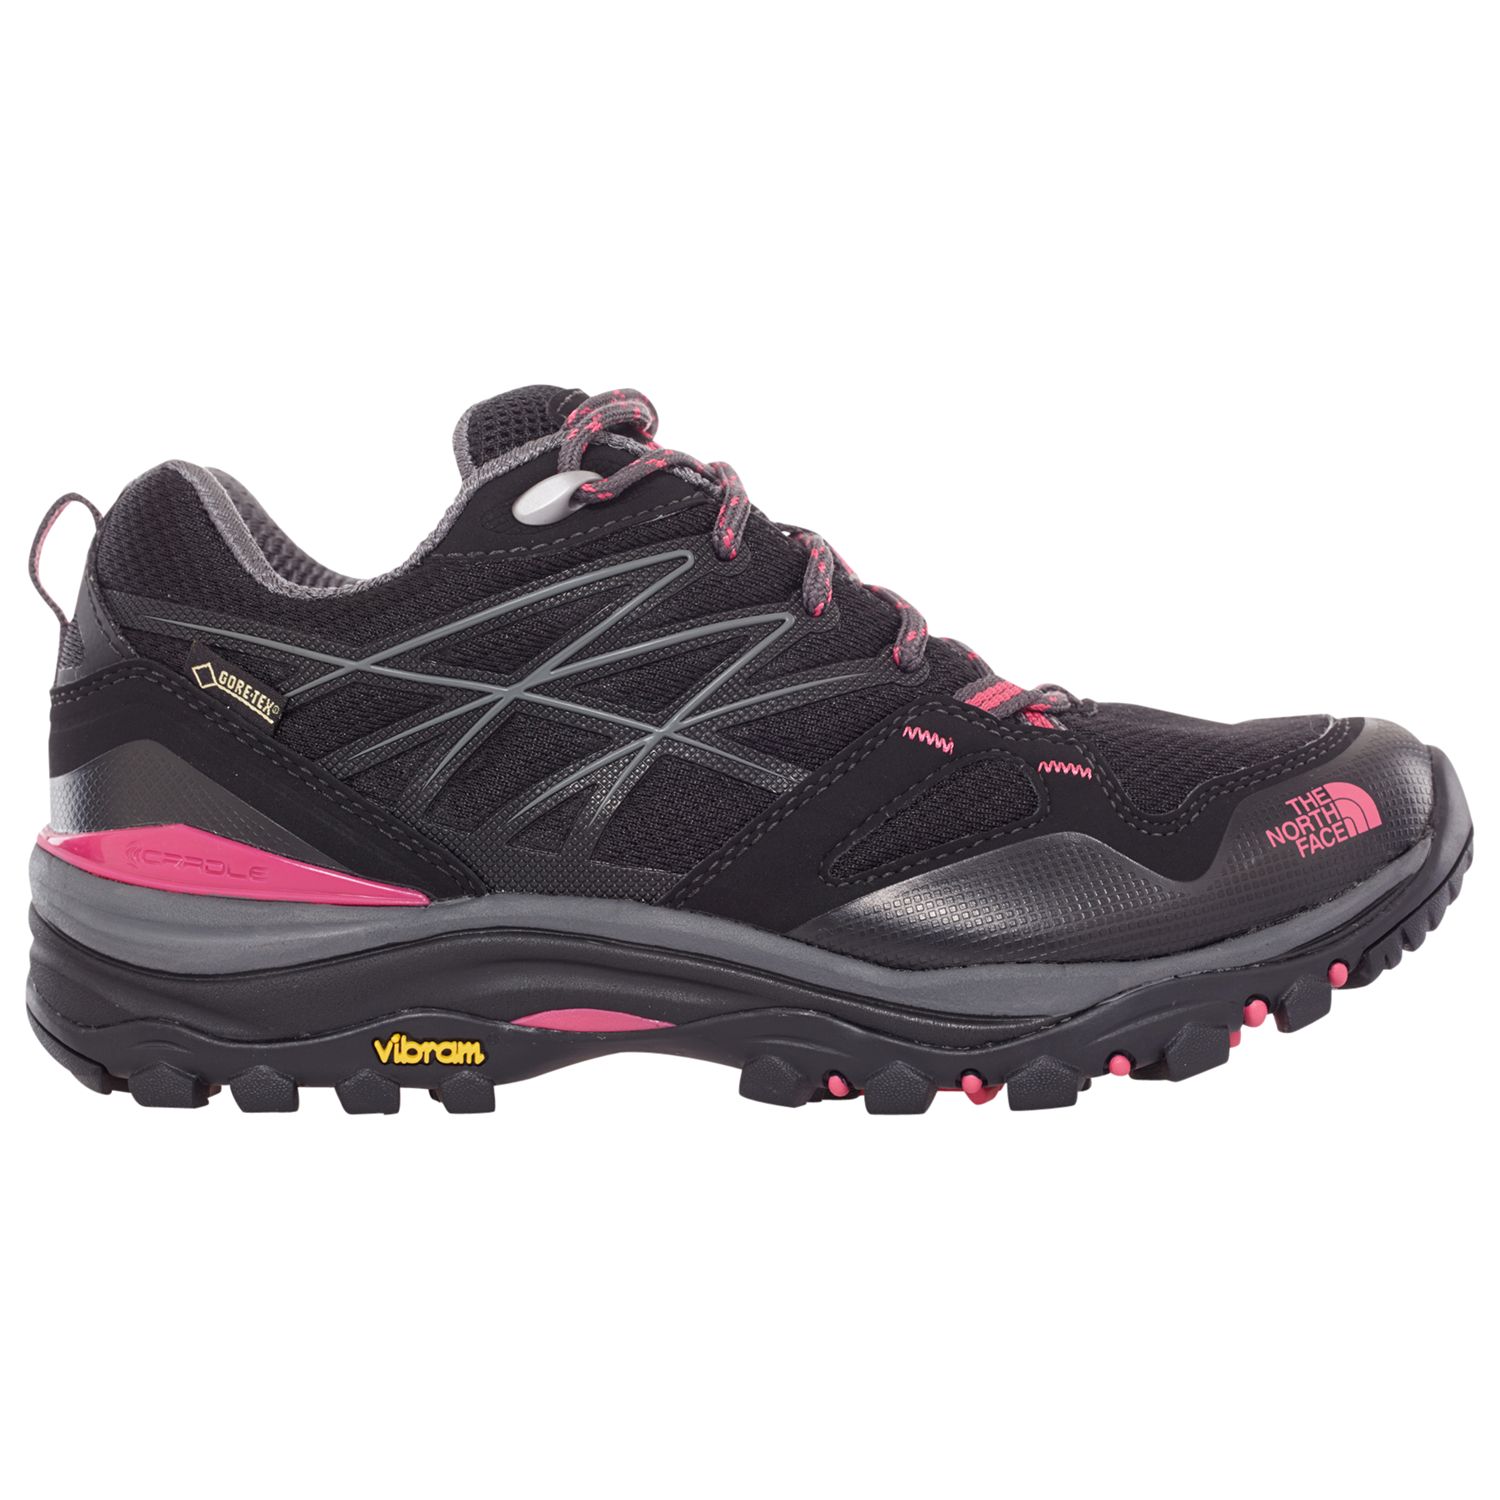 The North Face Hedgehog Fastpack GTX Women's Hiking Shoe, TNF Black/Society Pink